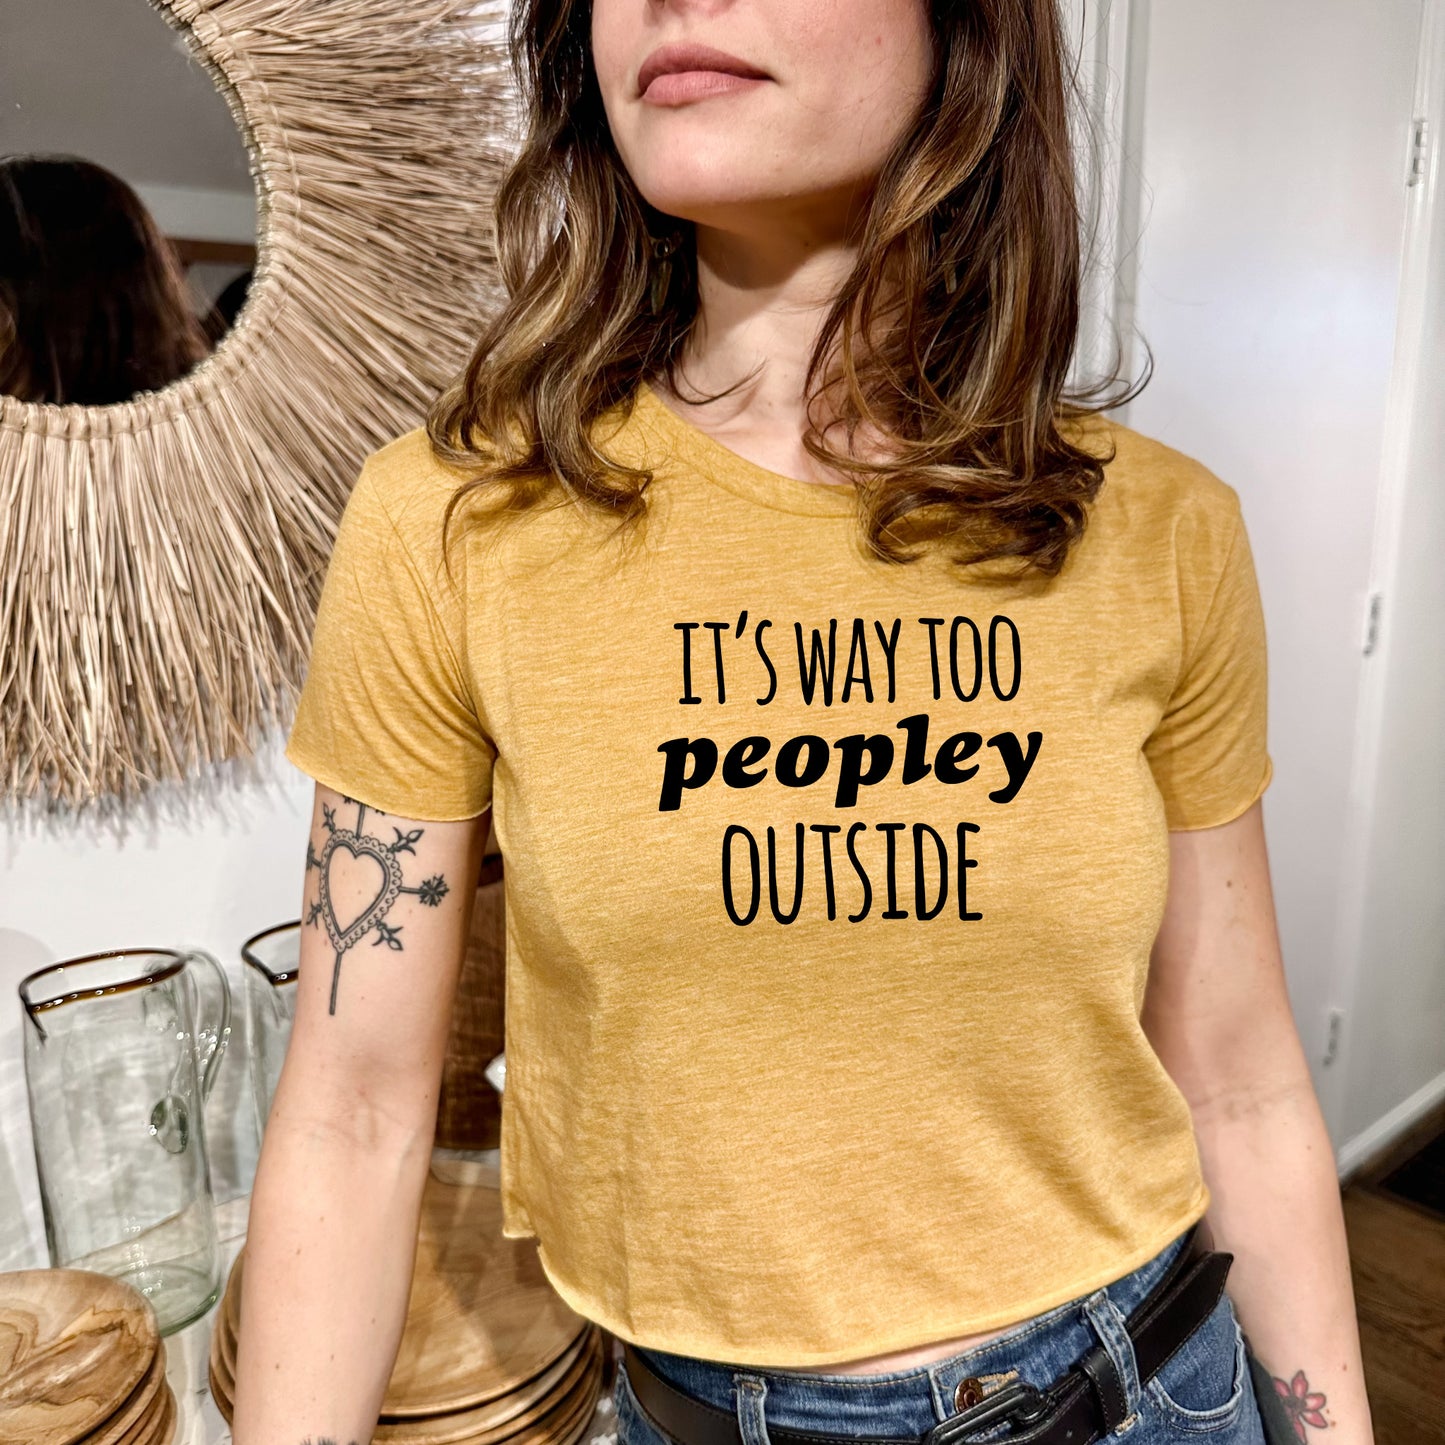 It's Way Too Peopley Outside - Women's Crop Tee - Heather Gray or Gold